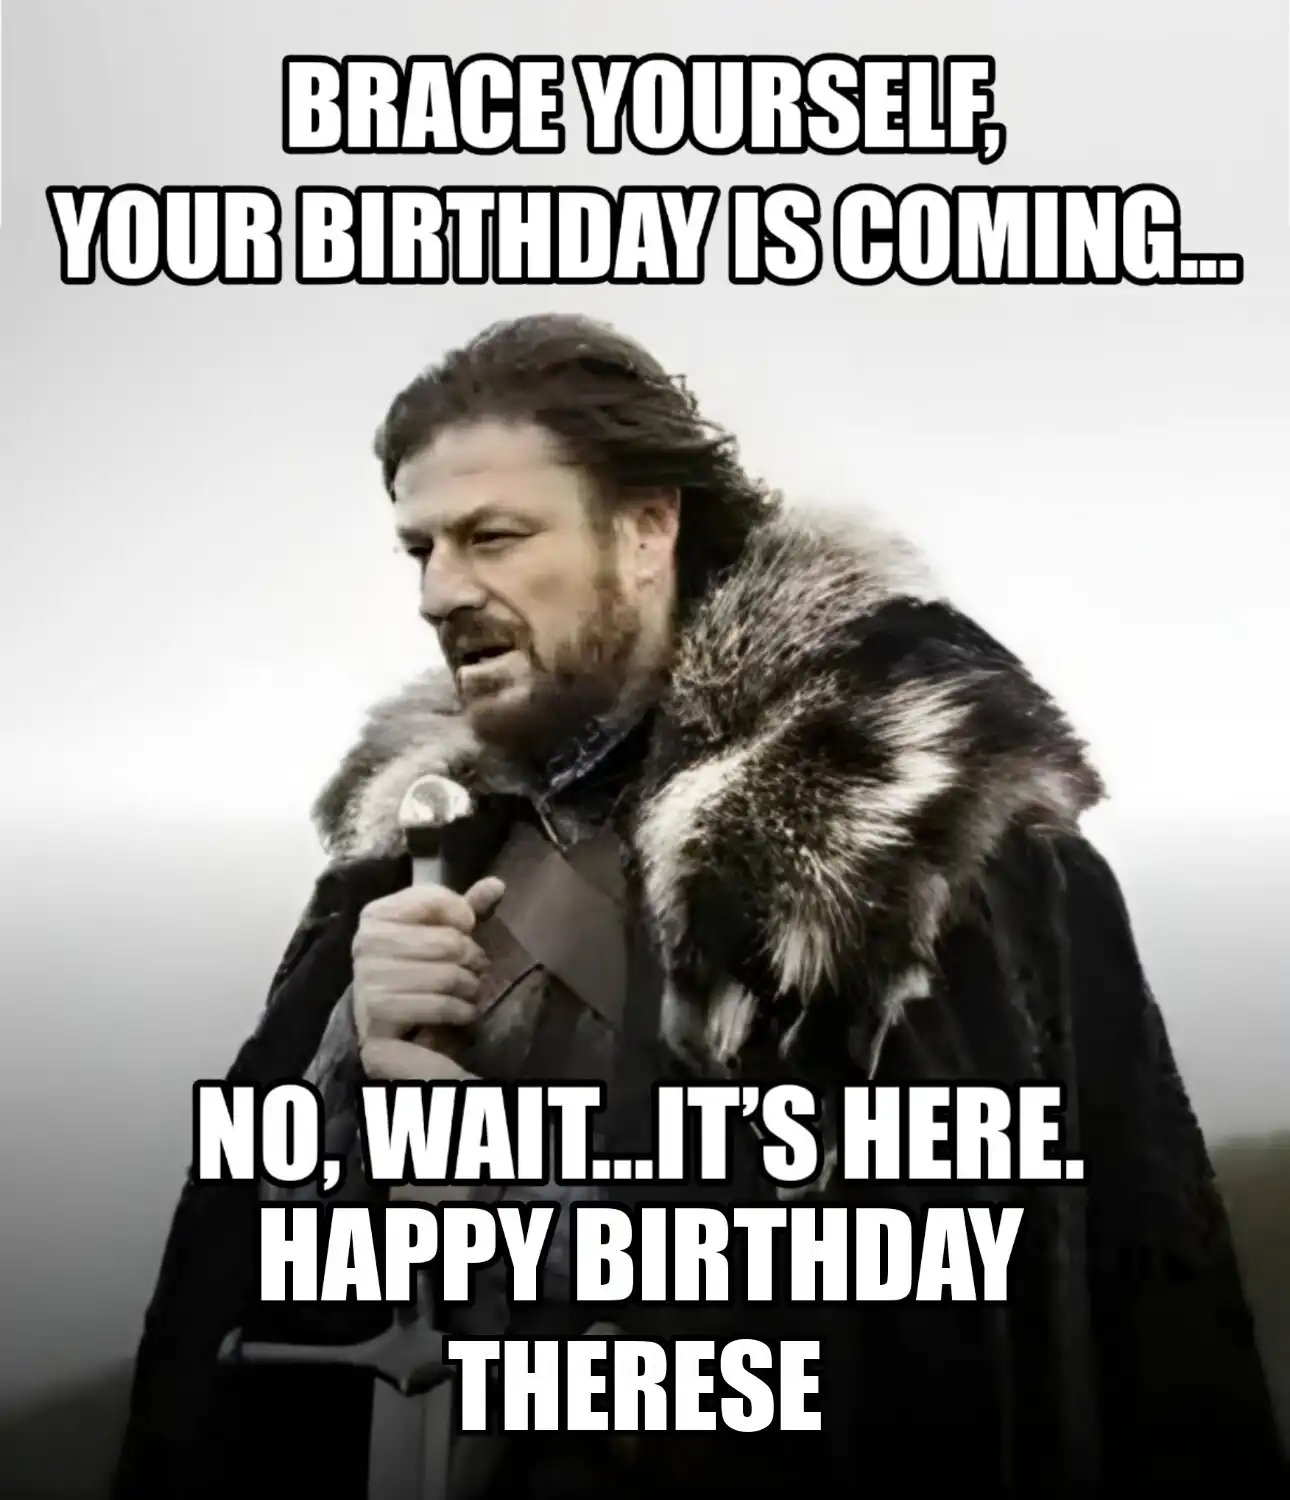 Happy Birthday Therese Brace Yourself Your Birthday Is Coming Meme